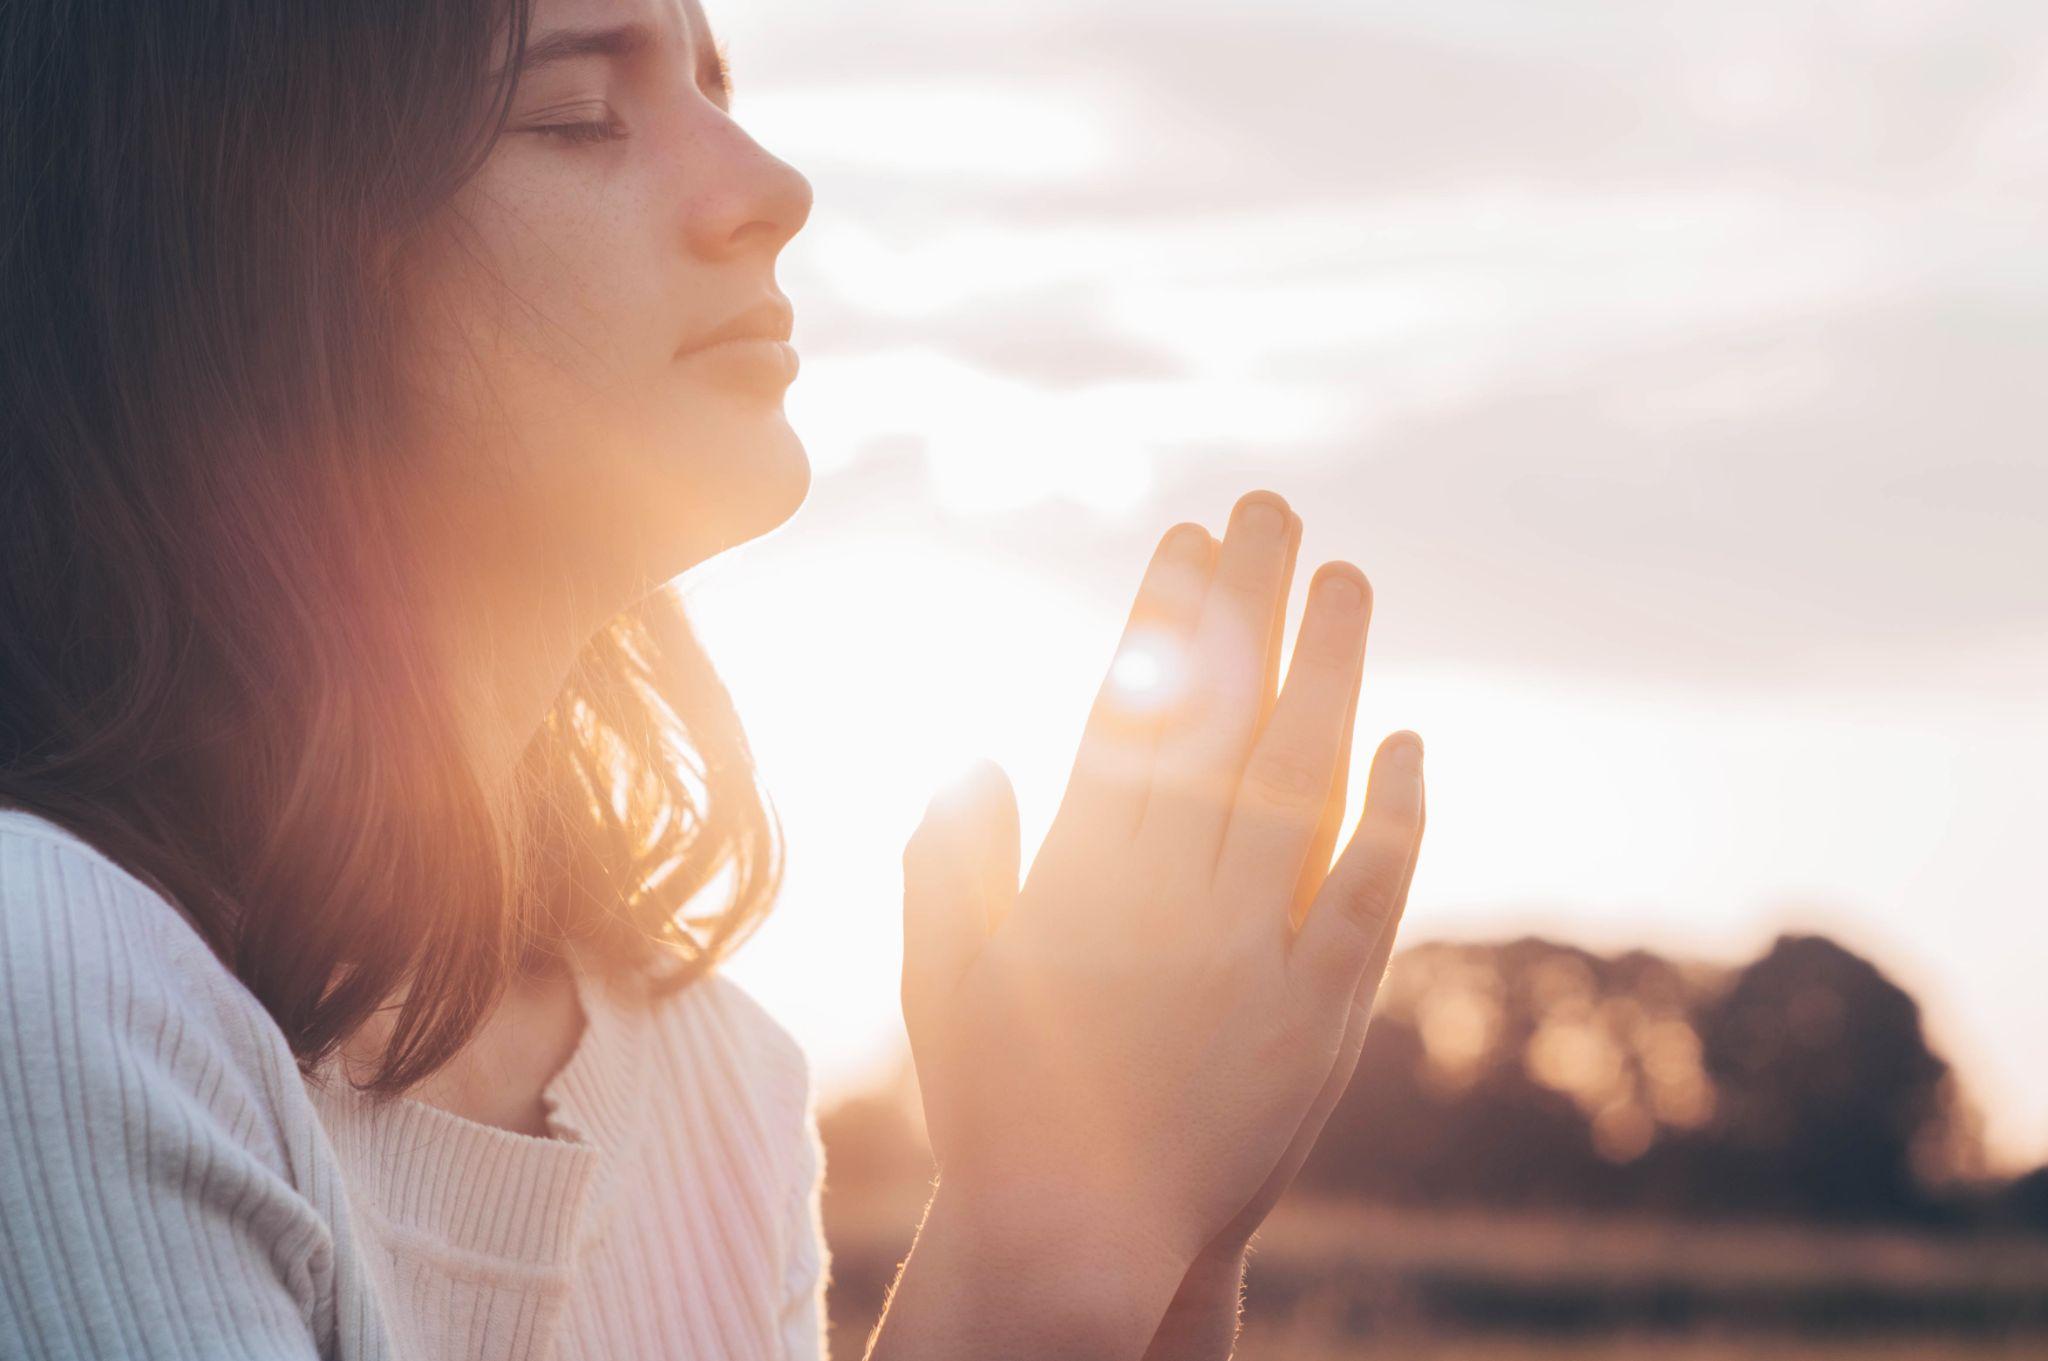 Teenager Girl closed her eyes, praying in a field during beautiful sunset